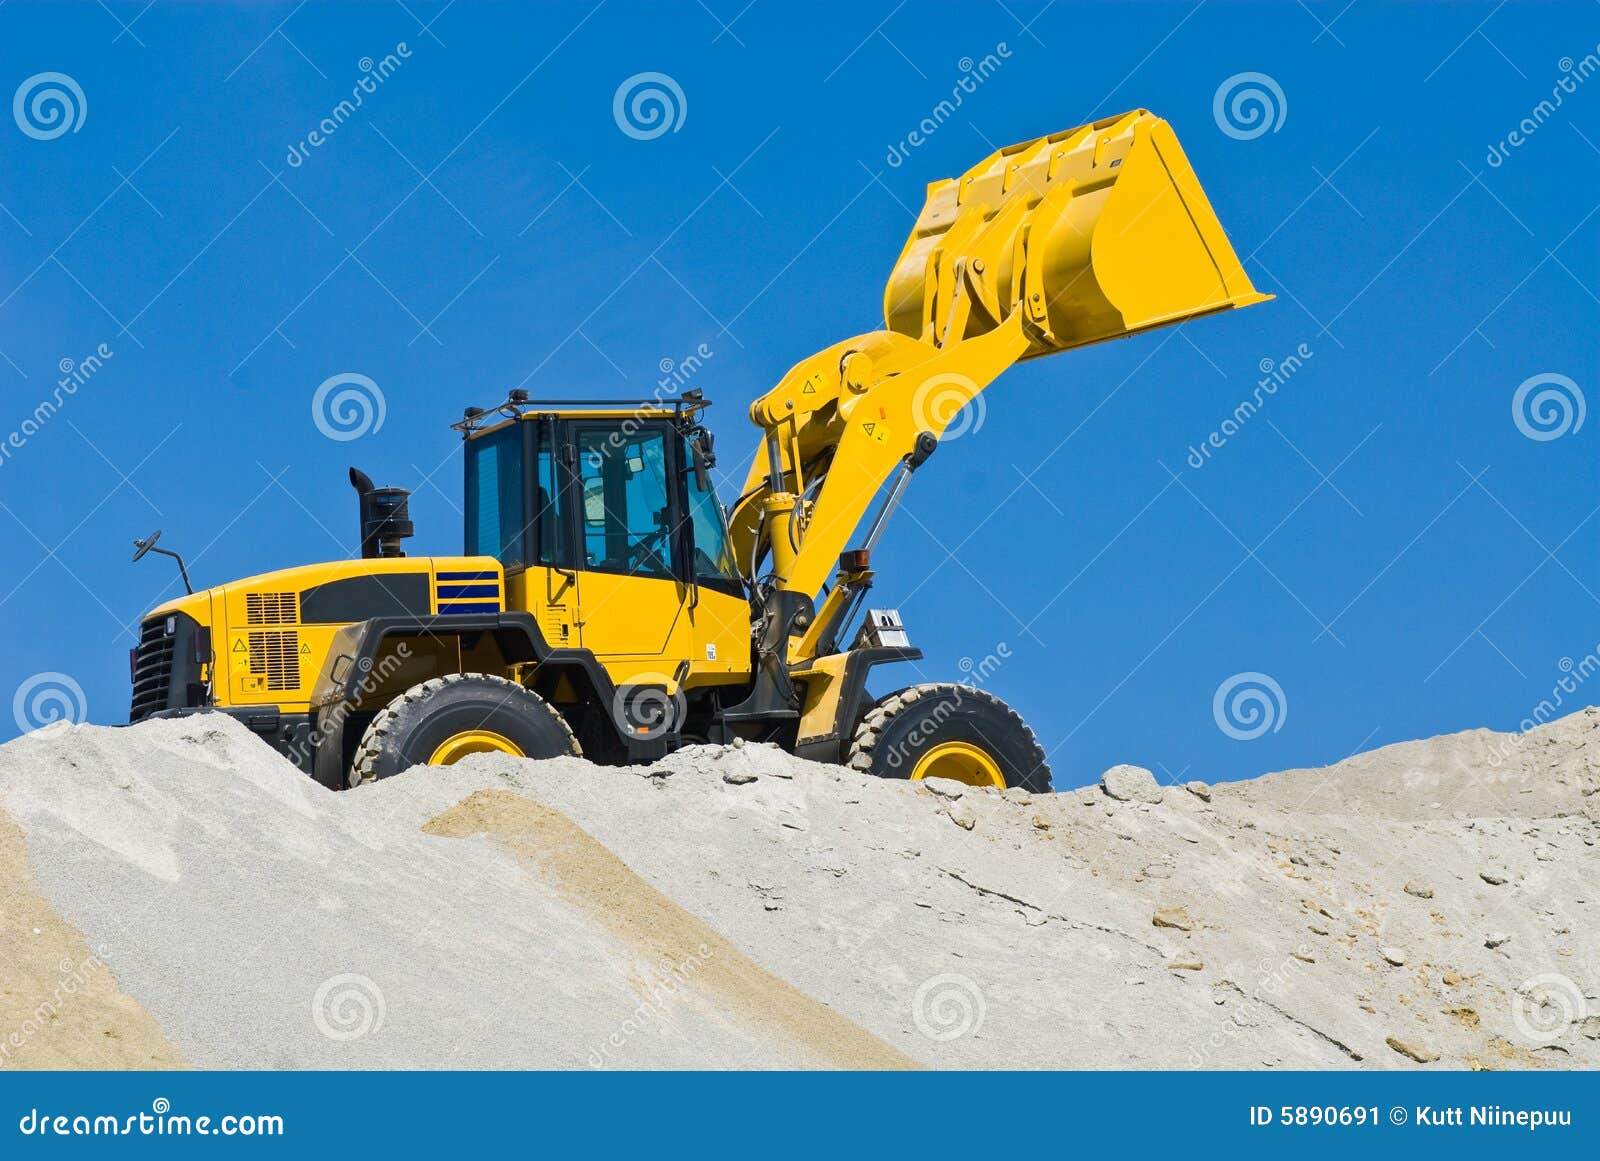 A yellow excavator working on sand, blue sky in the background.